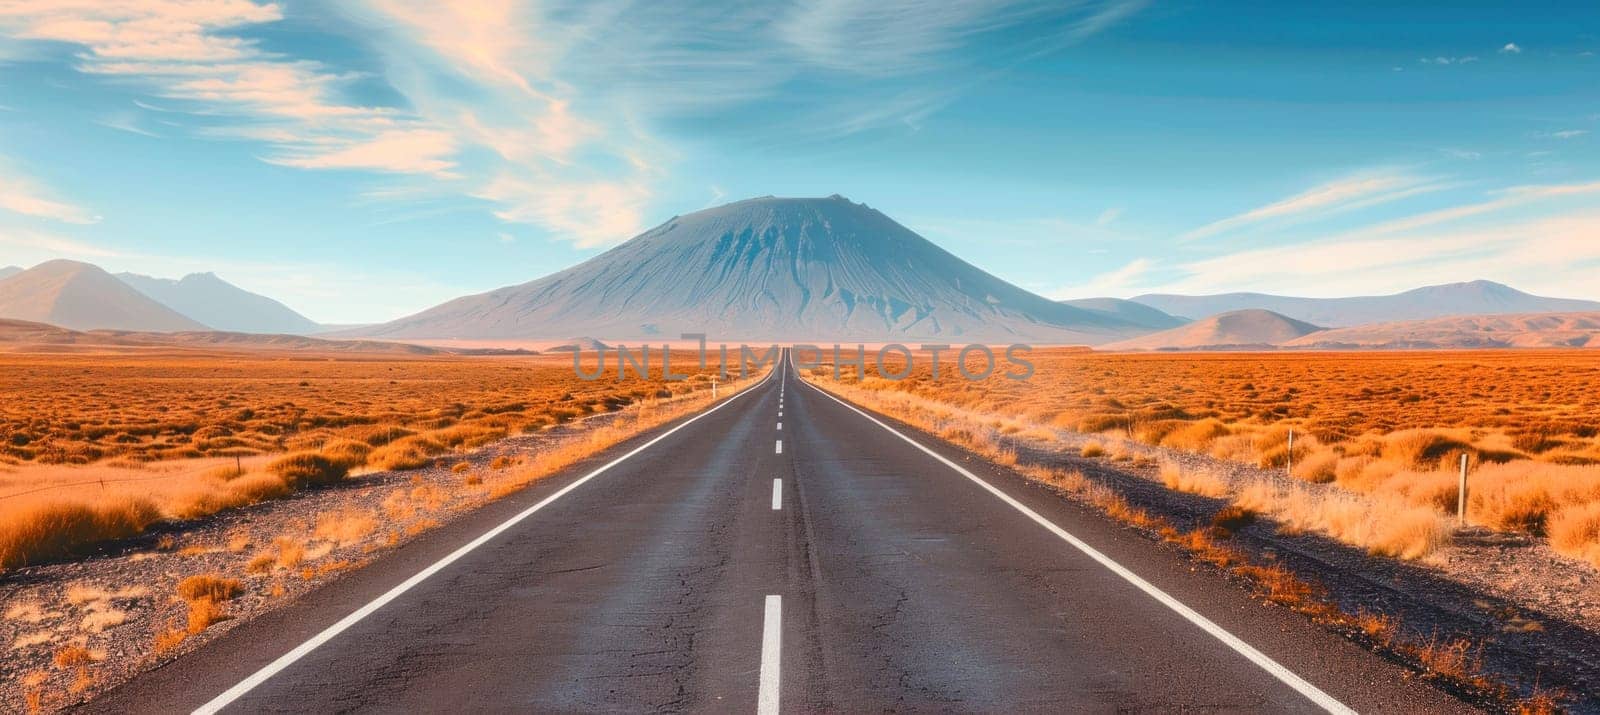 A beautiful road in a desert with a mountain view, ideal for exciting travel and adventures under the open sky